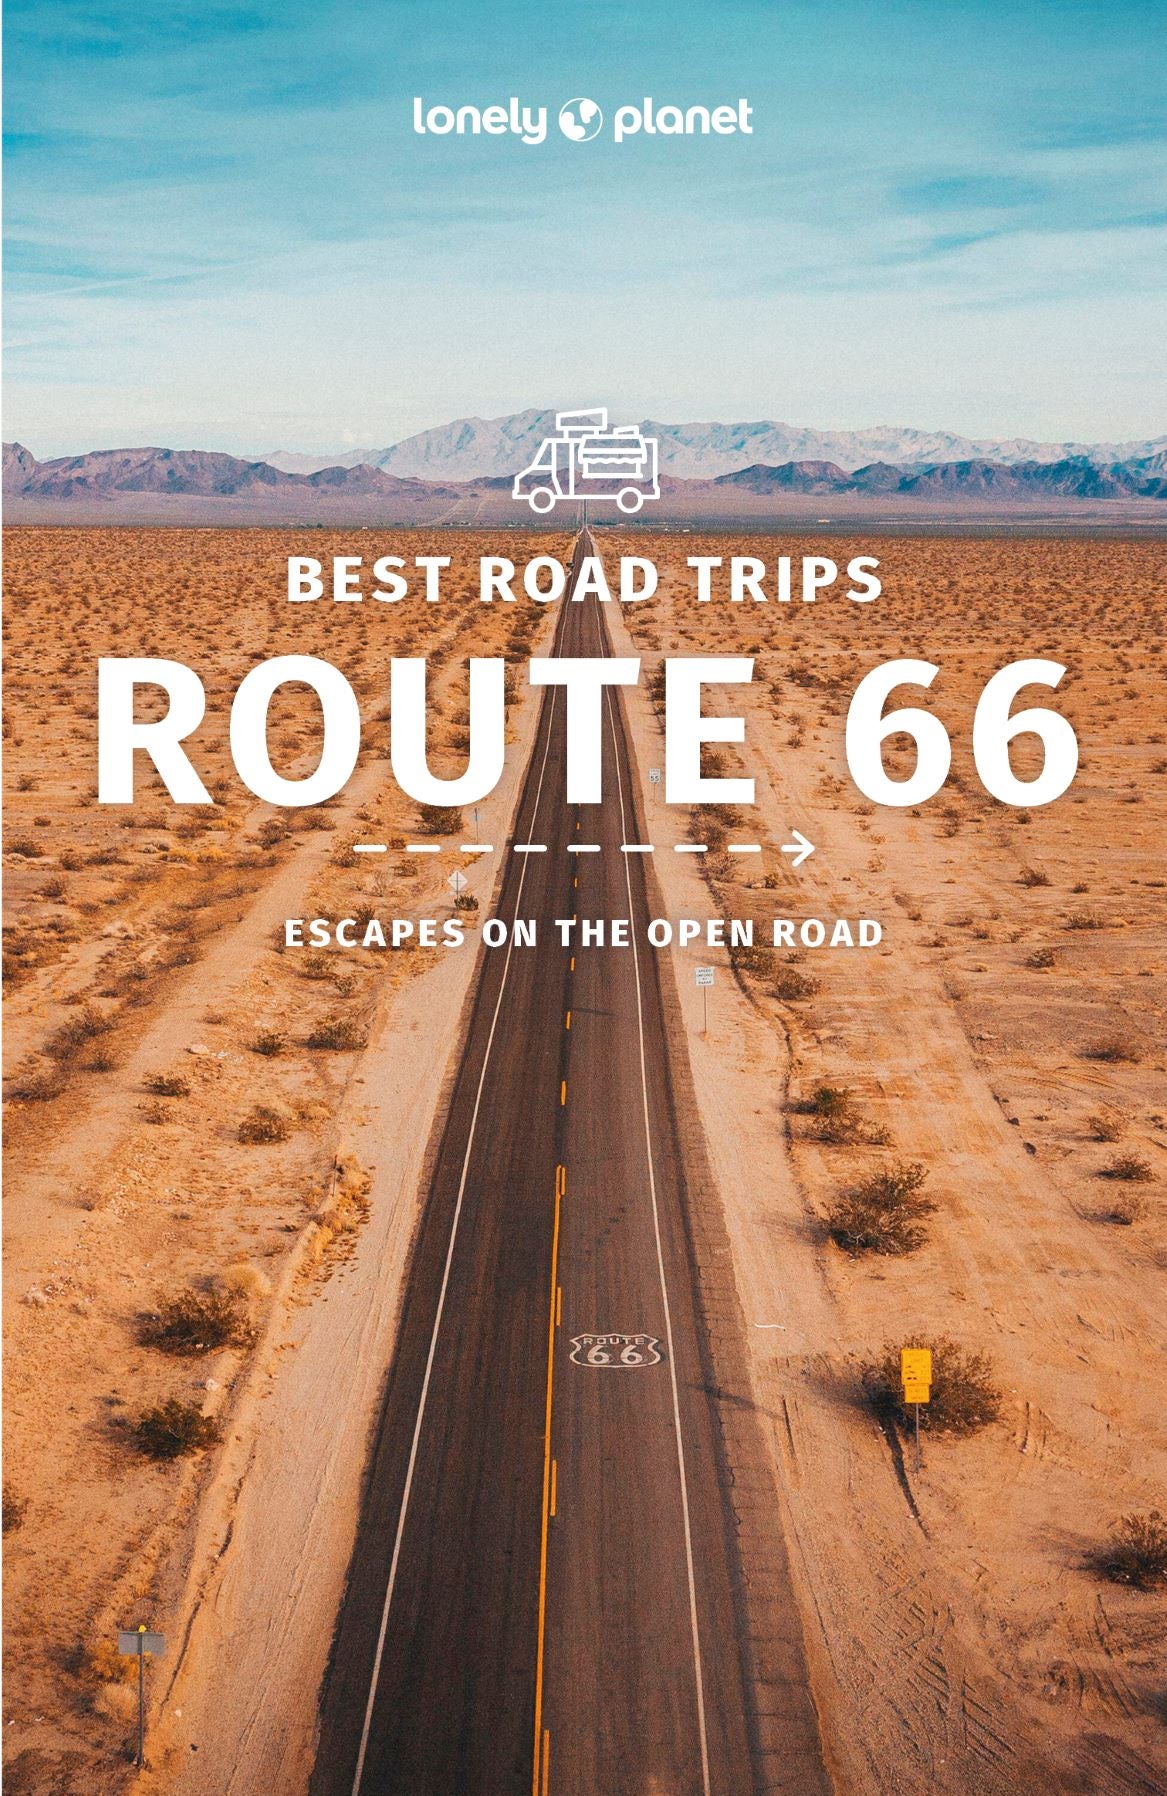 Road　Trips　Paper　Bonetto,　Route　Lonely　Plus　Mark　Planet　Andrew　Planet,　Cristian　Bender,　Lonely　by　66　Johanson